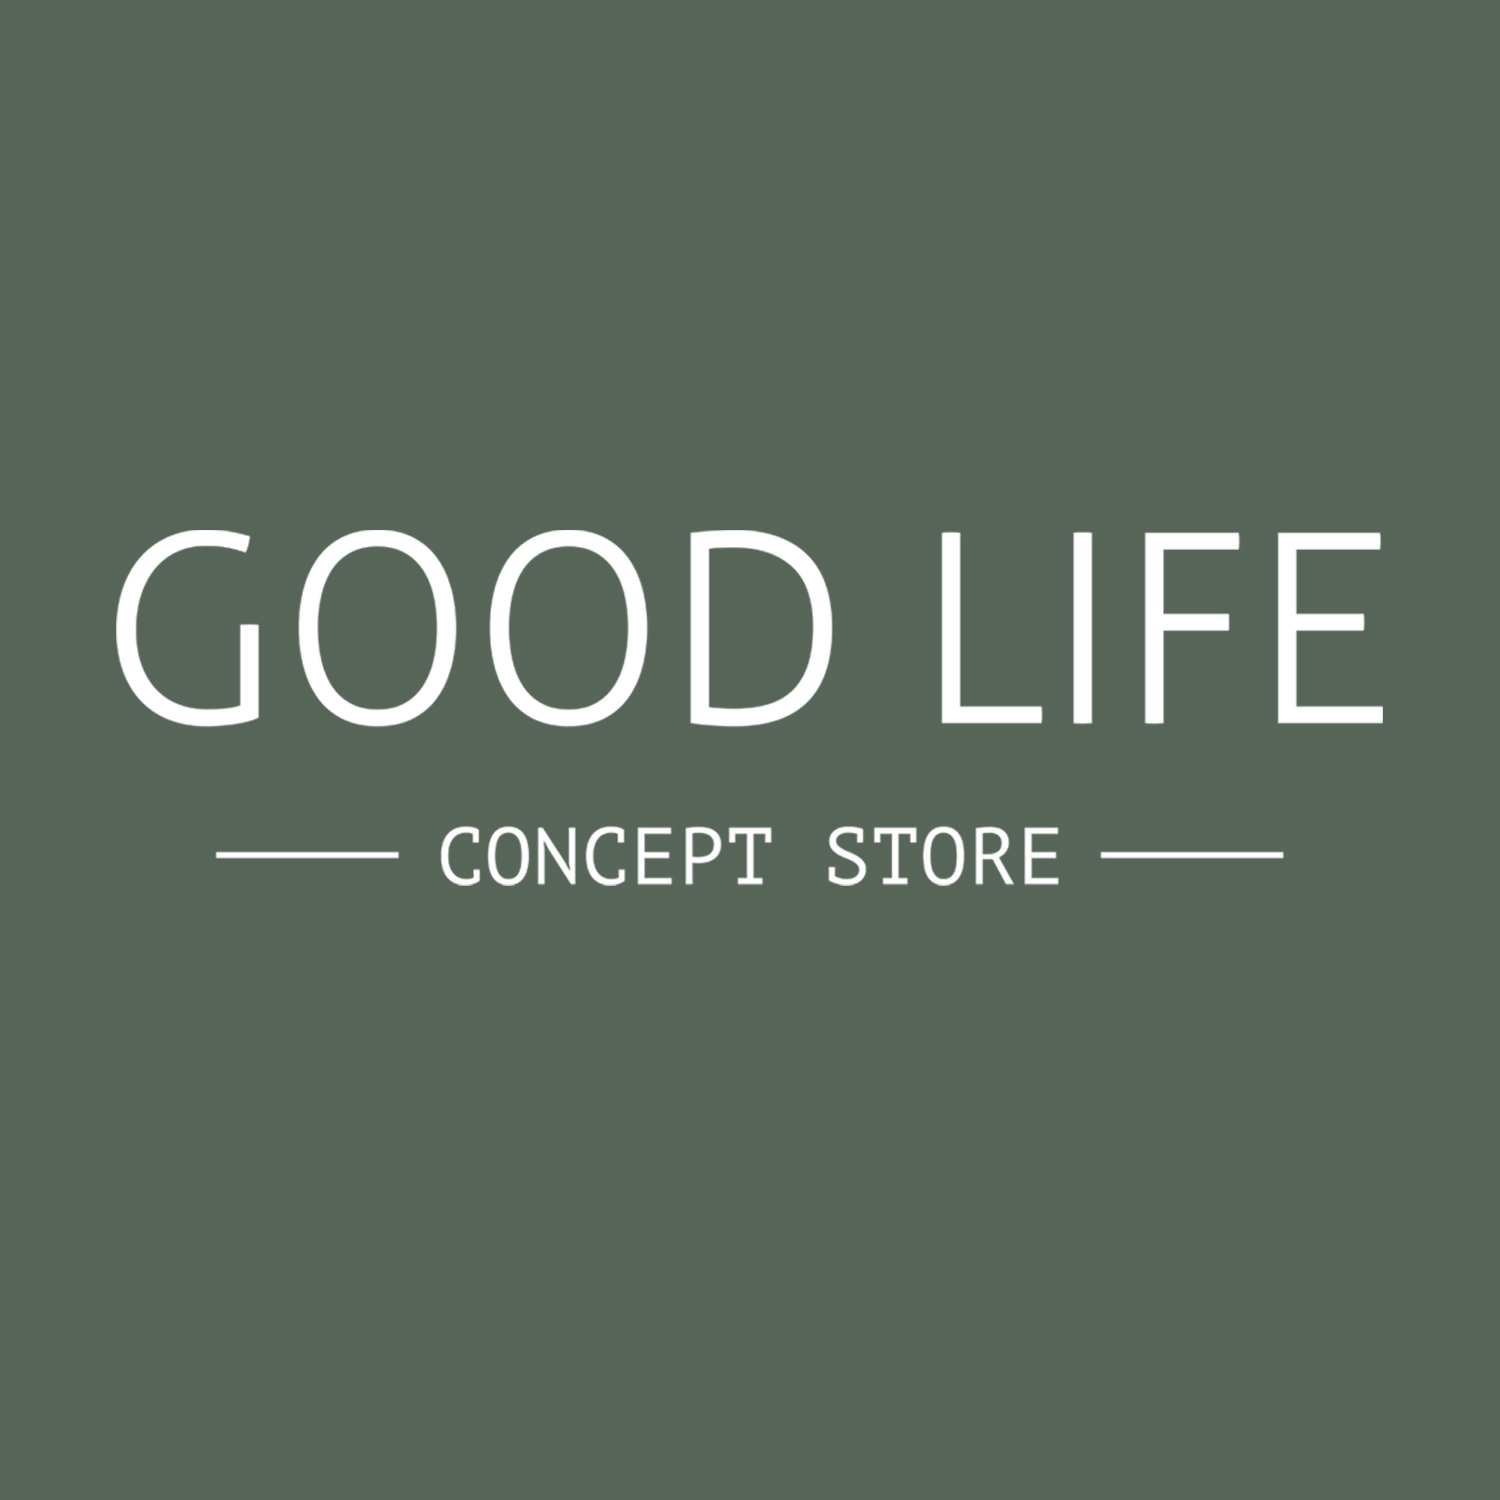 GOOD LIFE - Concept Store